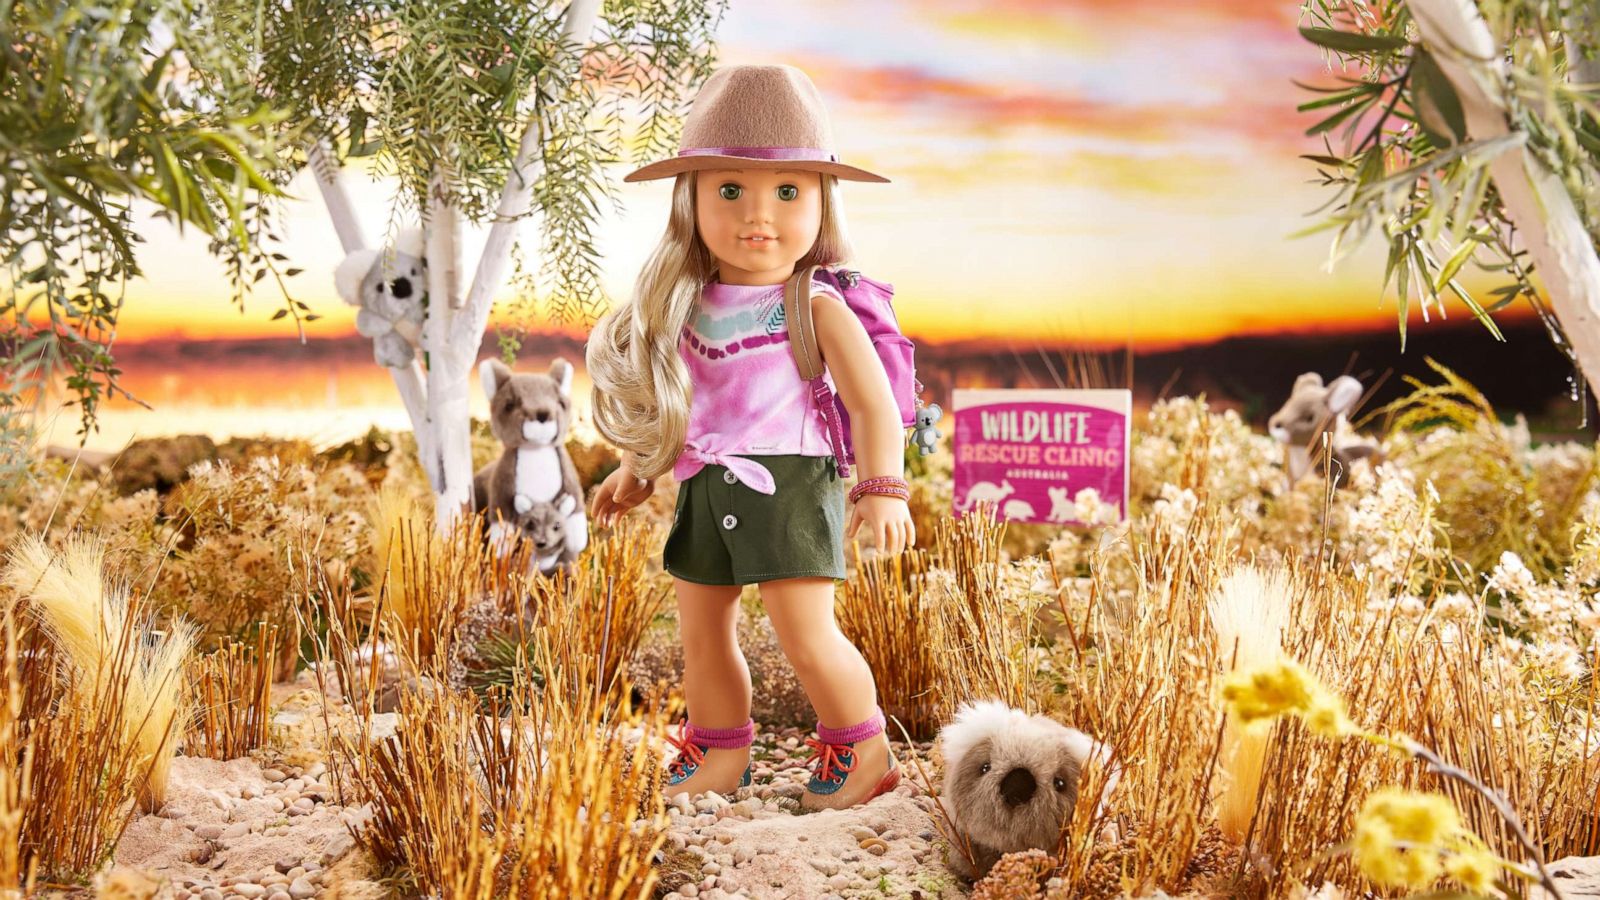 American Girl S Doll Of The Year Is Wildlife Conservationist